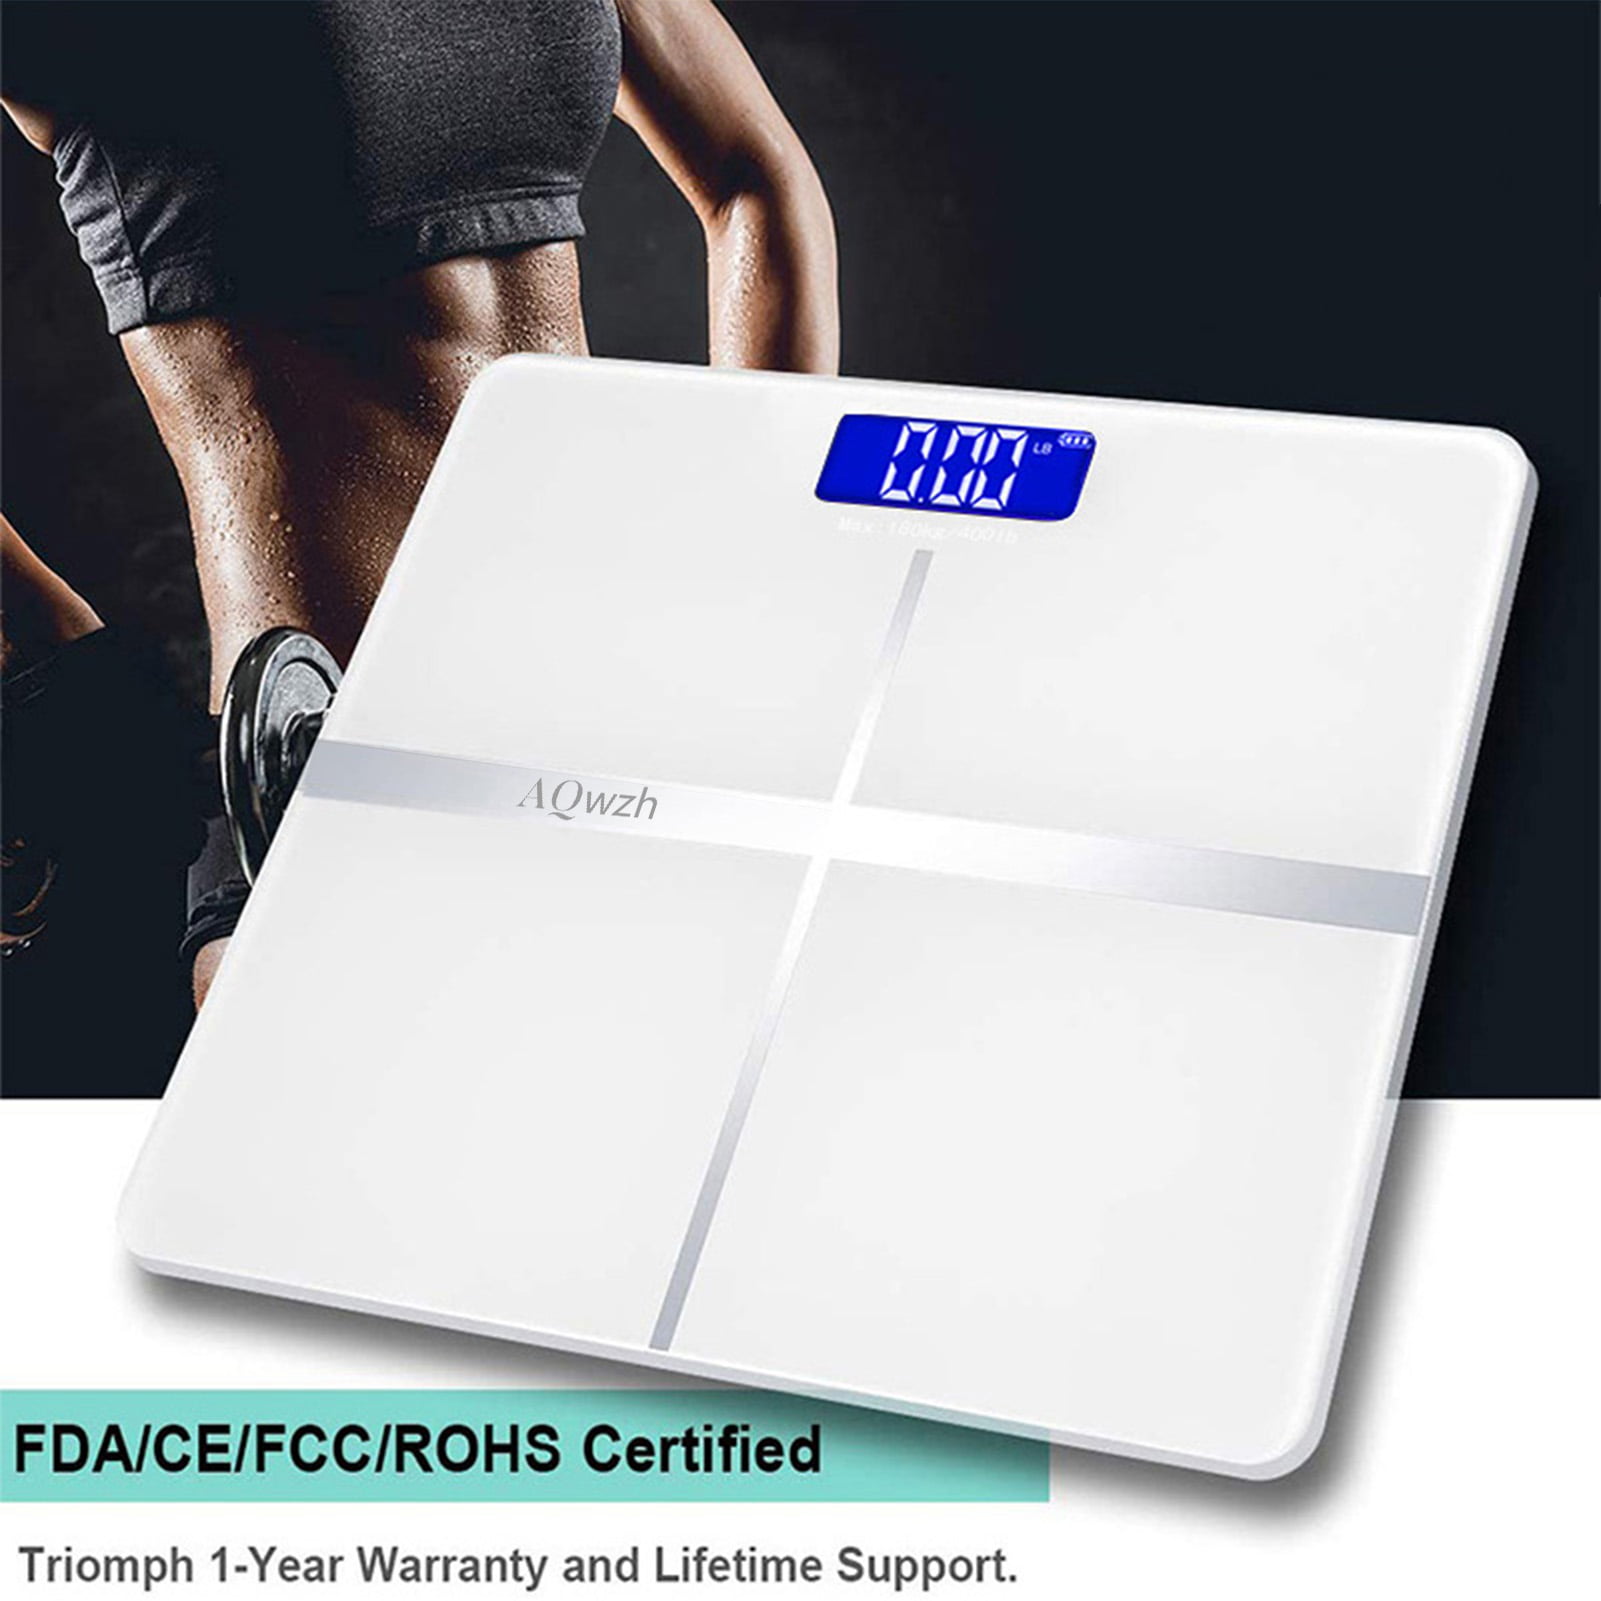 Digital Scale, Body Weight Bathroom Scale 396lb/180kg High Accuracy,  Step-On Technology with Lithium Rechargeable Battery. - Pink, New